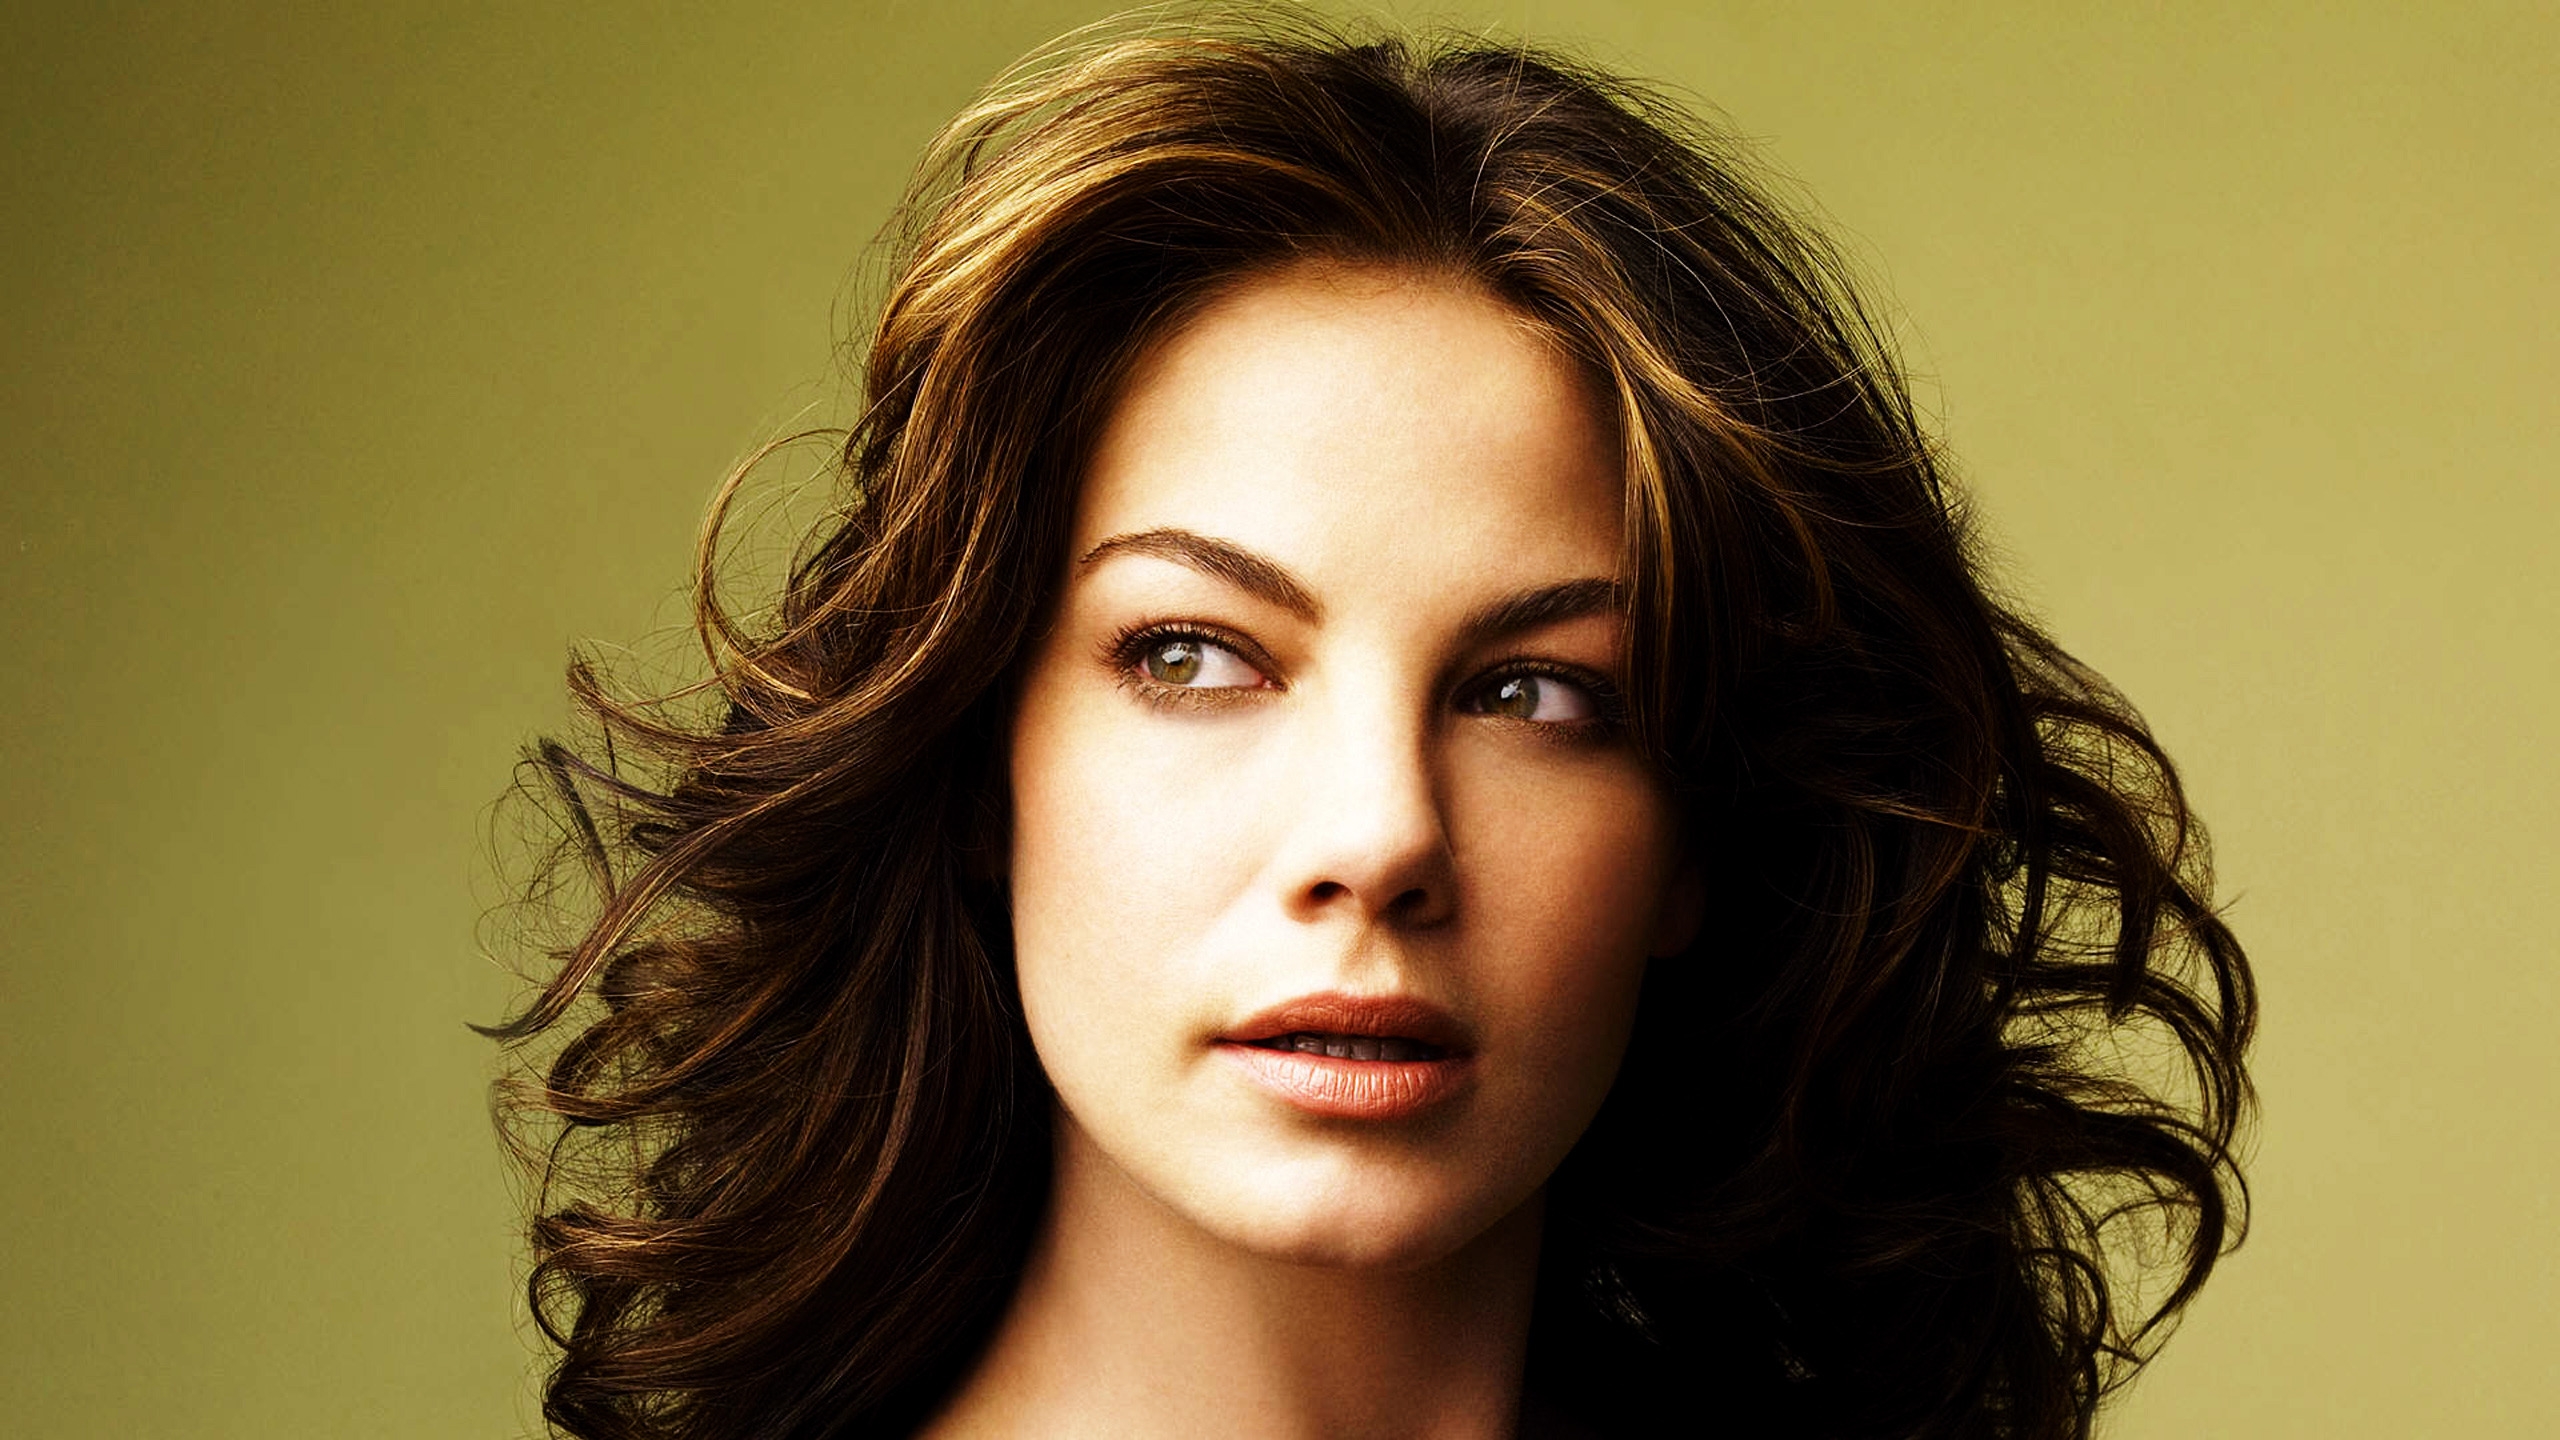 Michelle Monaghan for 2560x1440 HDTV resolution